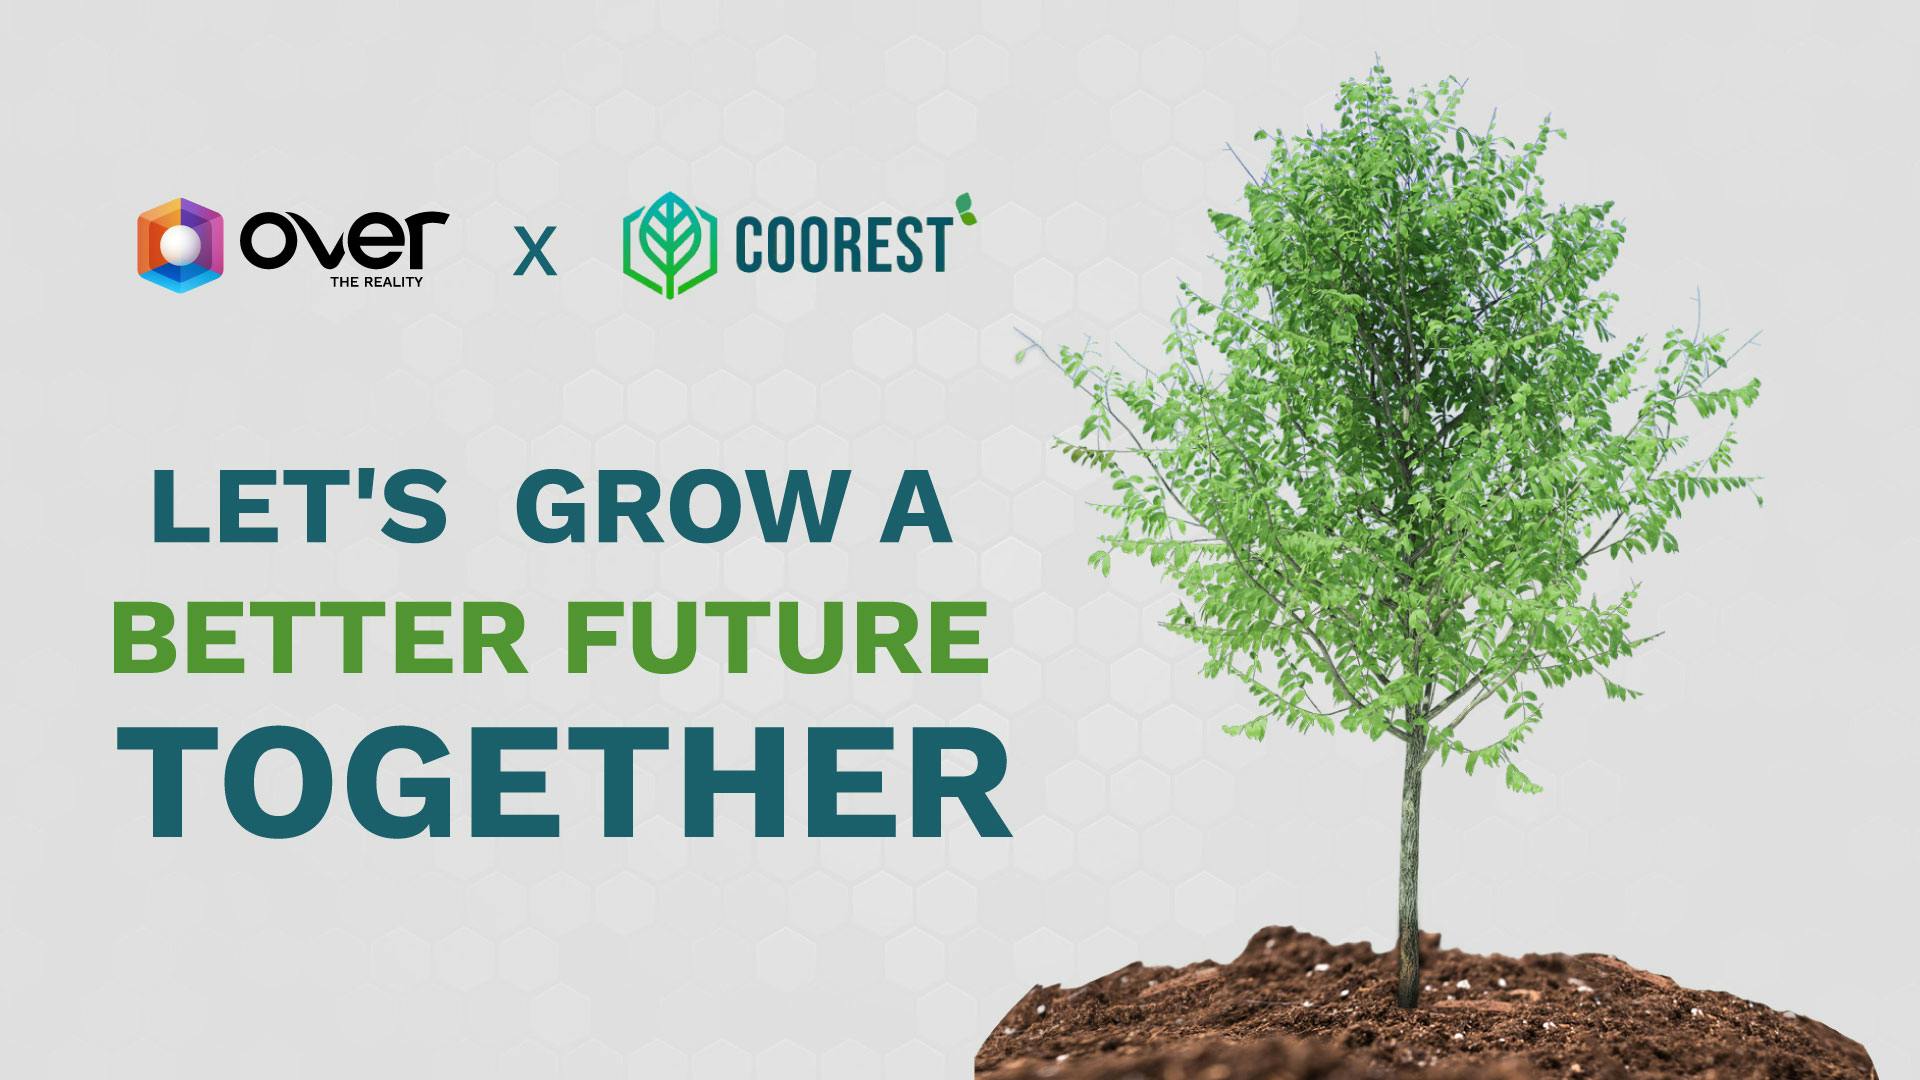 Coorest &amp; OVER: together for a sustainable future